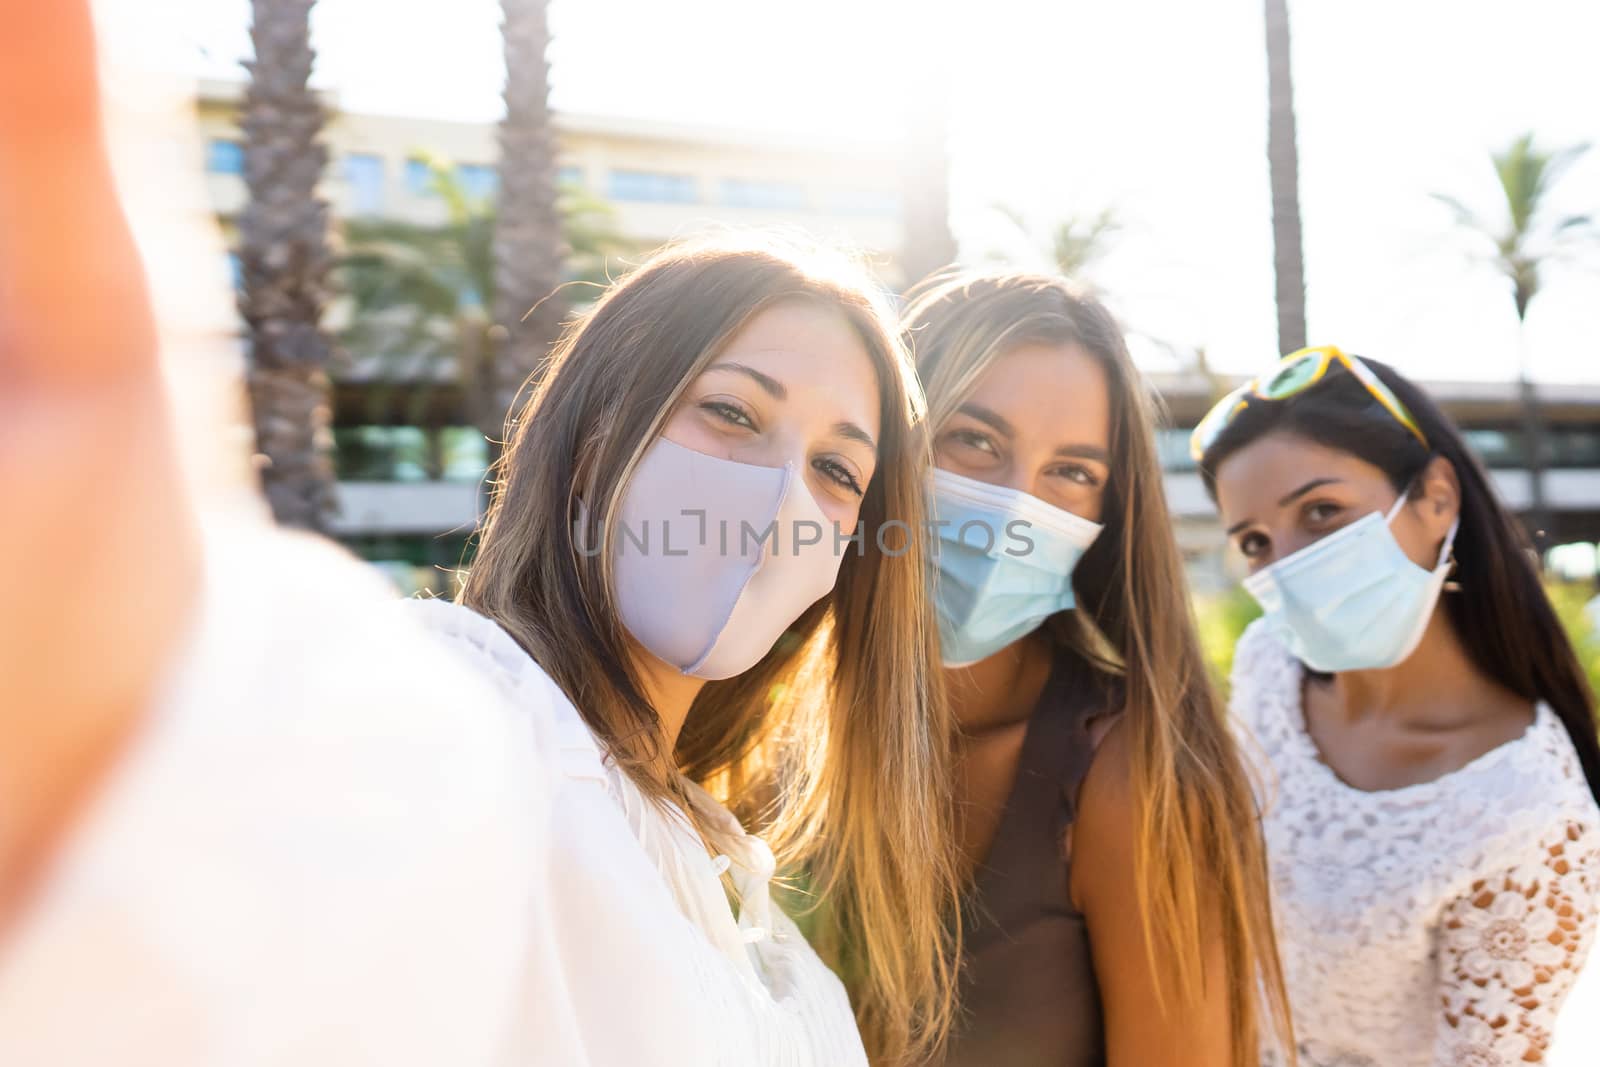 Cute blonde young woman take a selfie with her two female friends wearing the Coronavirus protection mask - New normal life with Covid-19 pandemic using social network connections